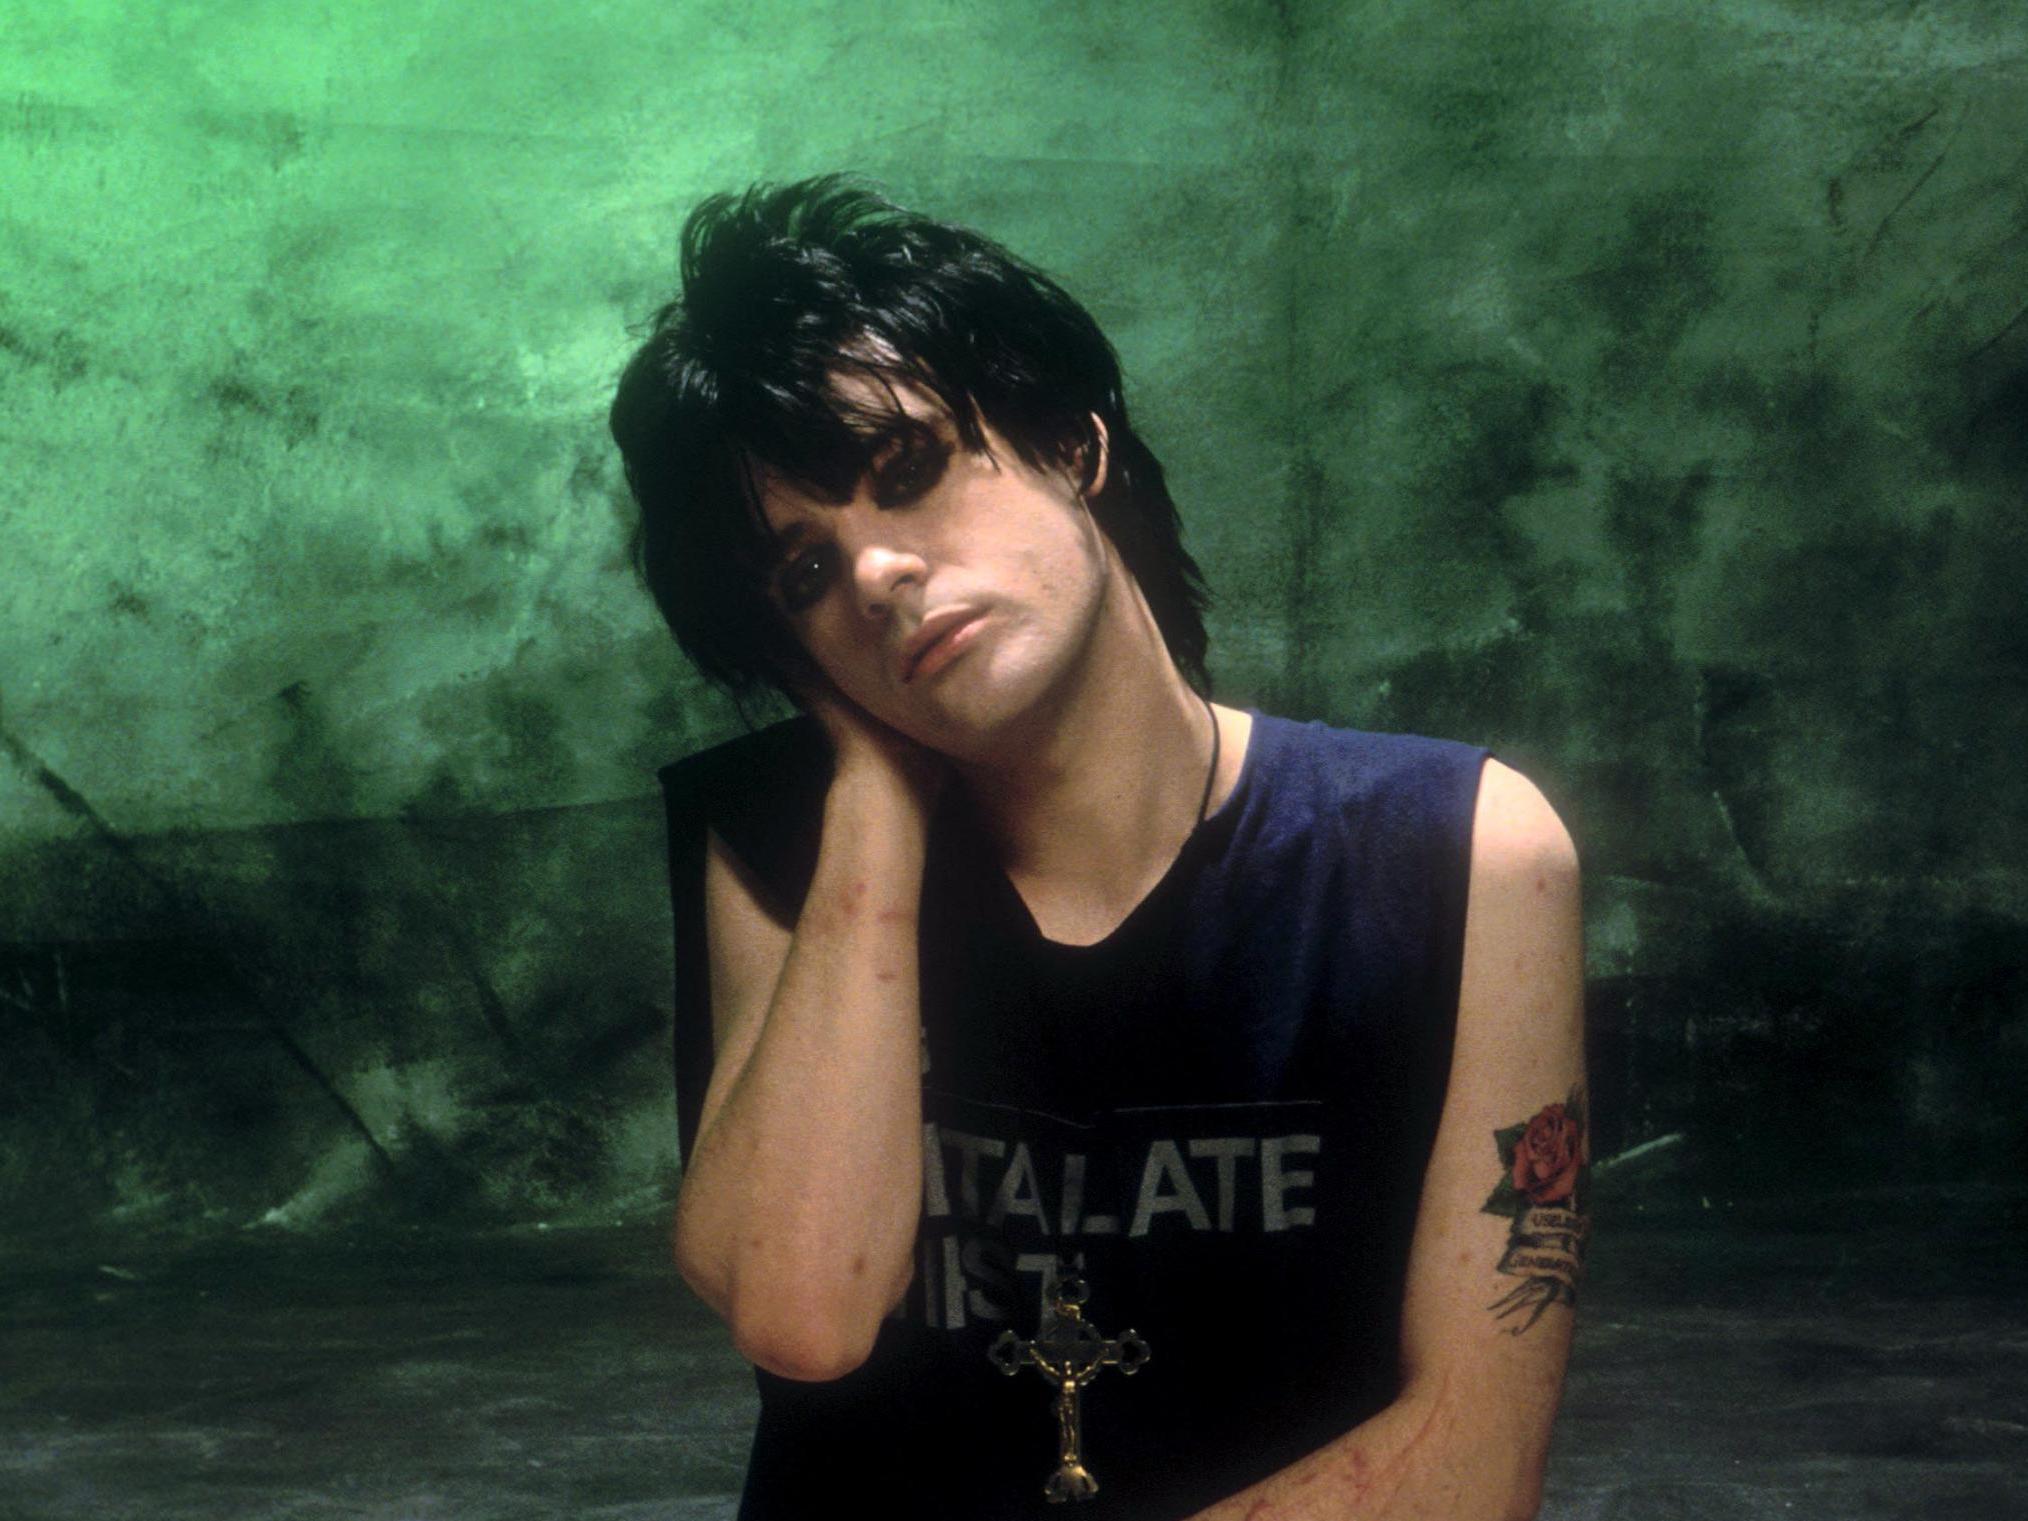 10 Yars Garls And 25 Yars Boys Sexvideos - Richey Edwards: The mysterious disappearance of the Manic Street Preachers  star, 25 years on | The Independent | The Independent